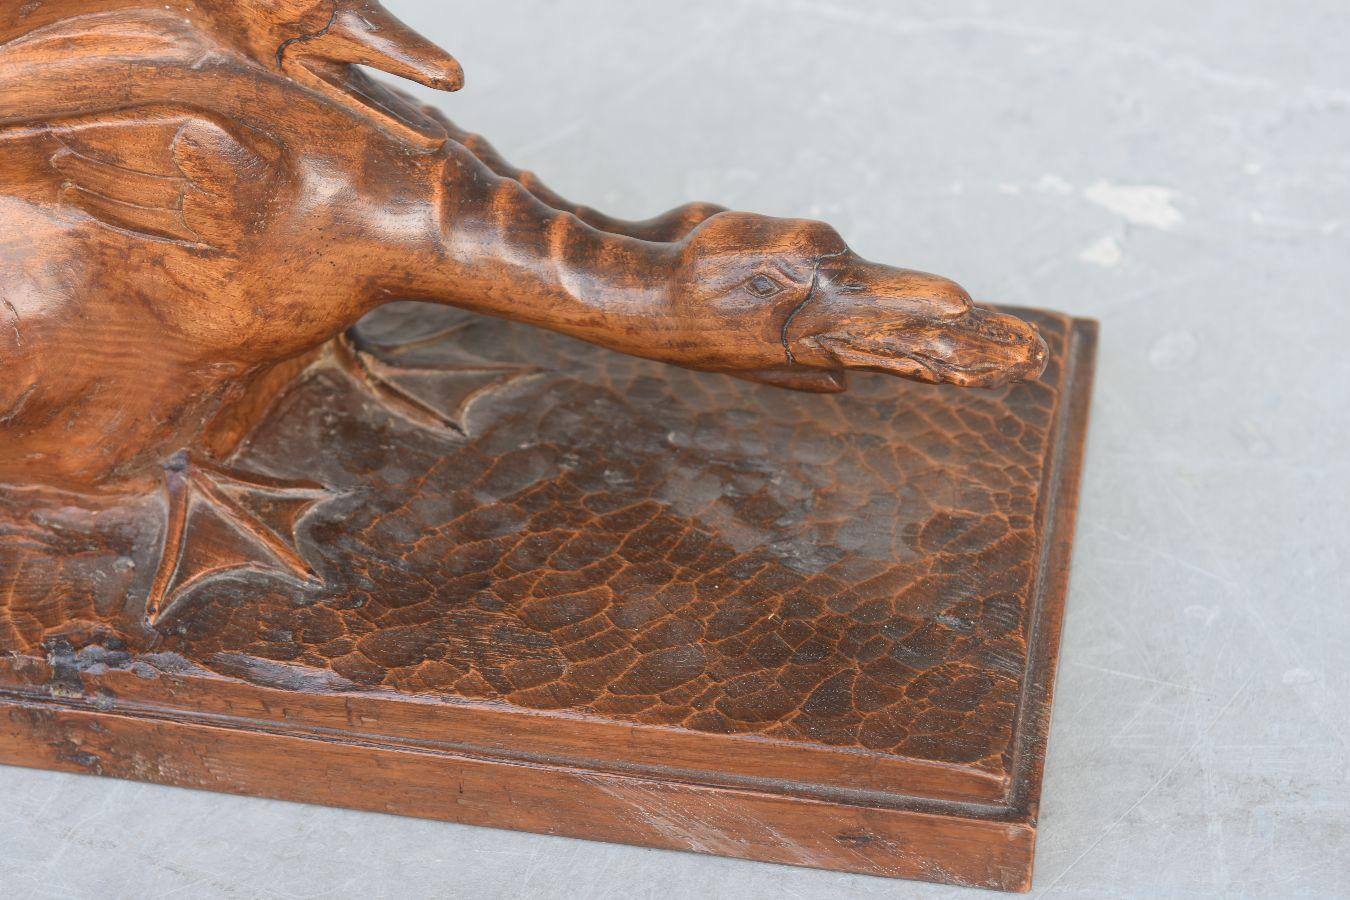 1930 Geese Fighting Over a Frog by H. Petrilly Art Deco Wooden Sculpture For Sale 3